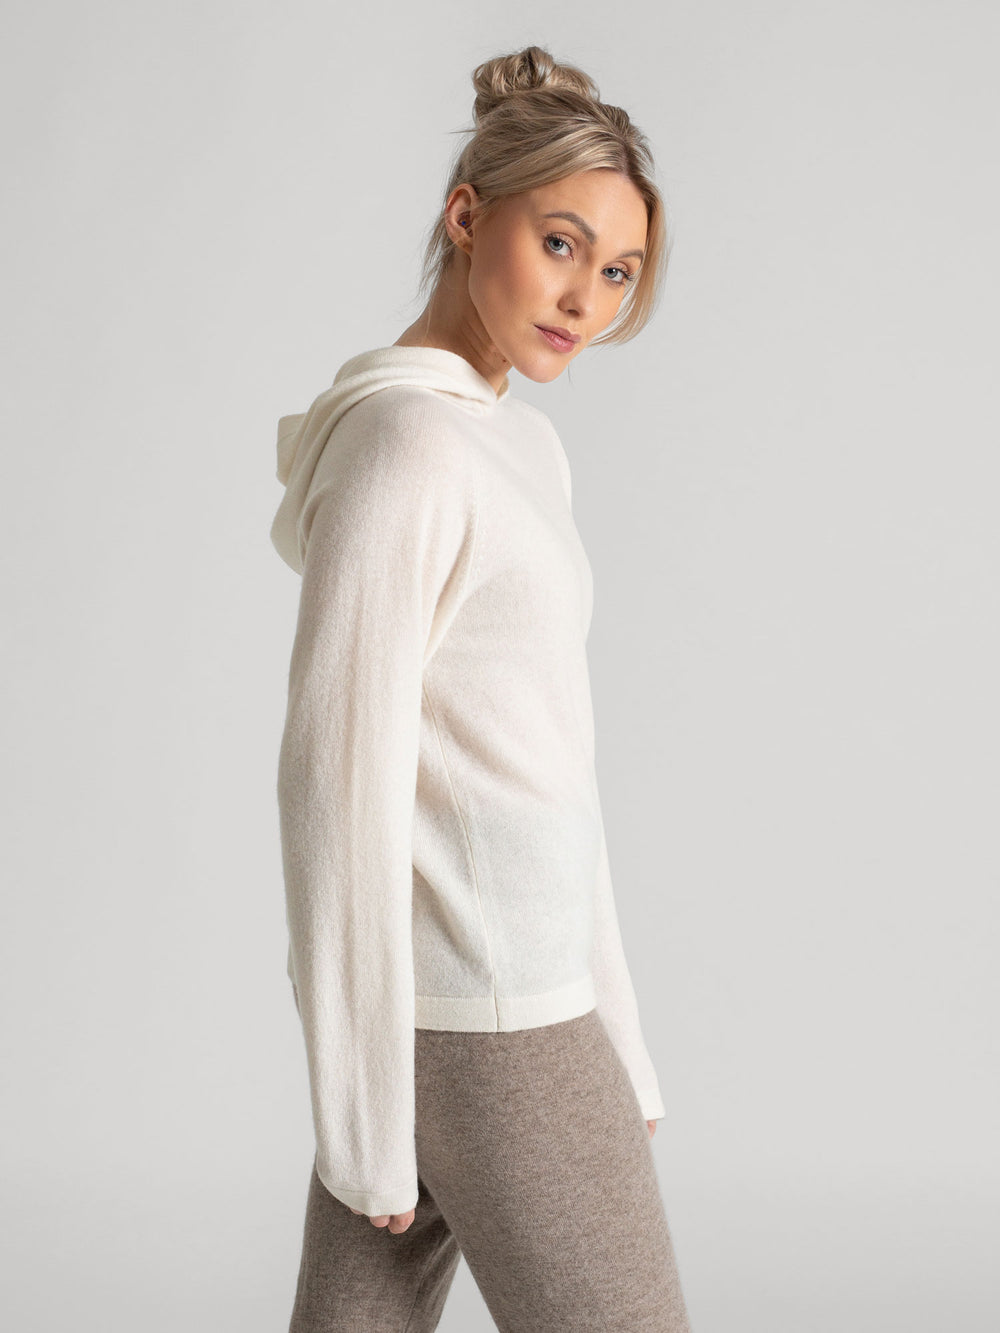  Cashmere hoodie made of 100% pure cashmere. Color: White. Scandinavian design by Kashmina.